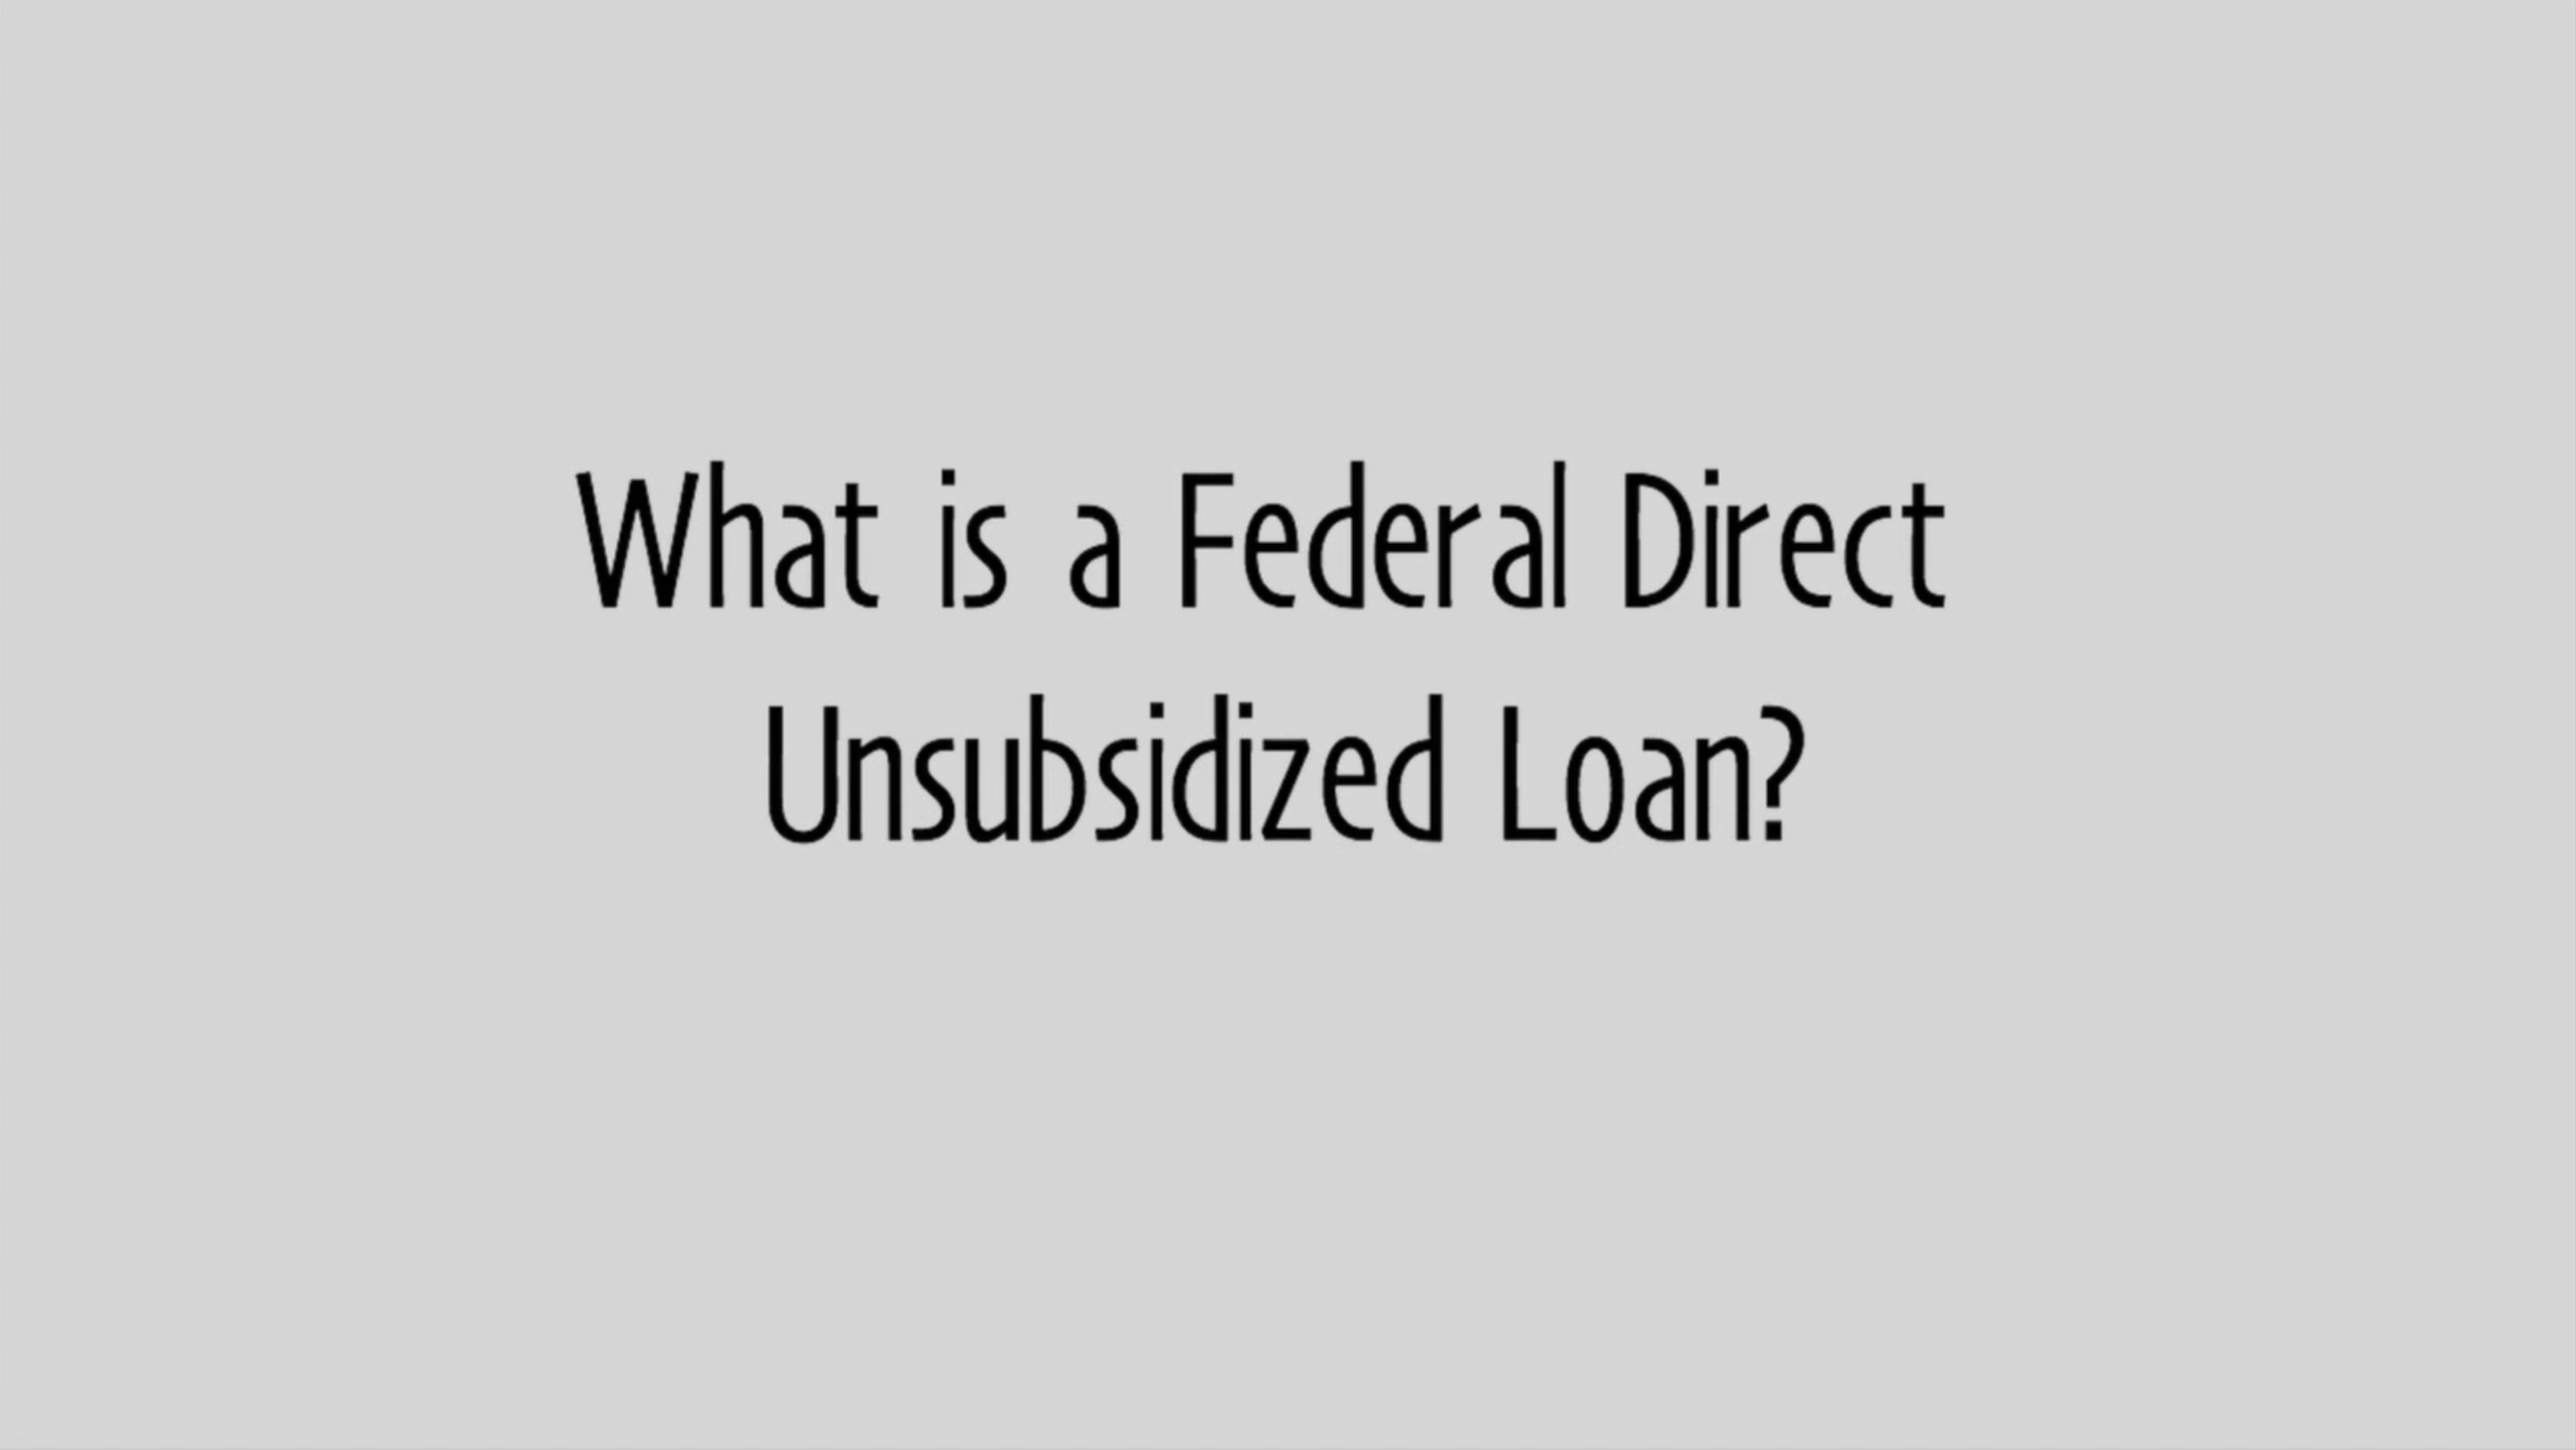 Play 'What is a Federal Direct Unsubsidized Loan?'